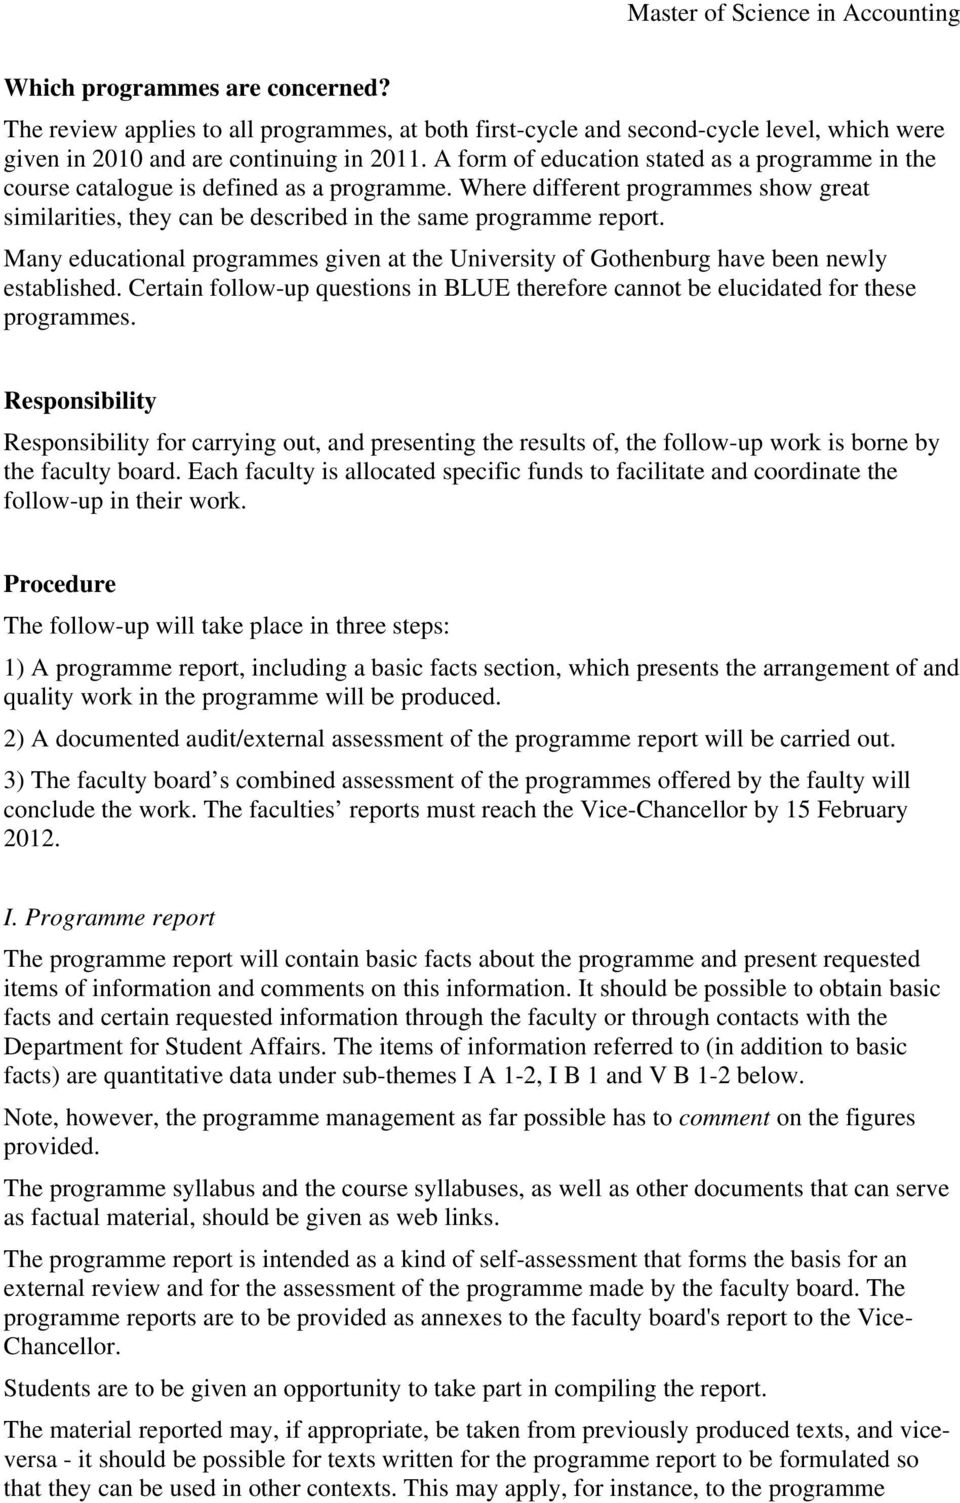 Many educational programmes given at the University of Gothenburg have been newly established. Certain follow-up questions in BLUE therefore cannot be elucidated for these programmes.